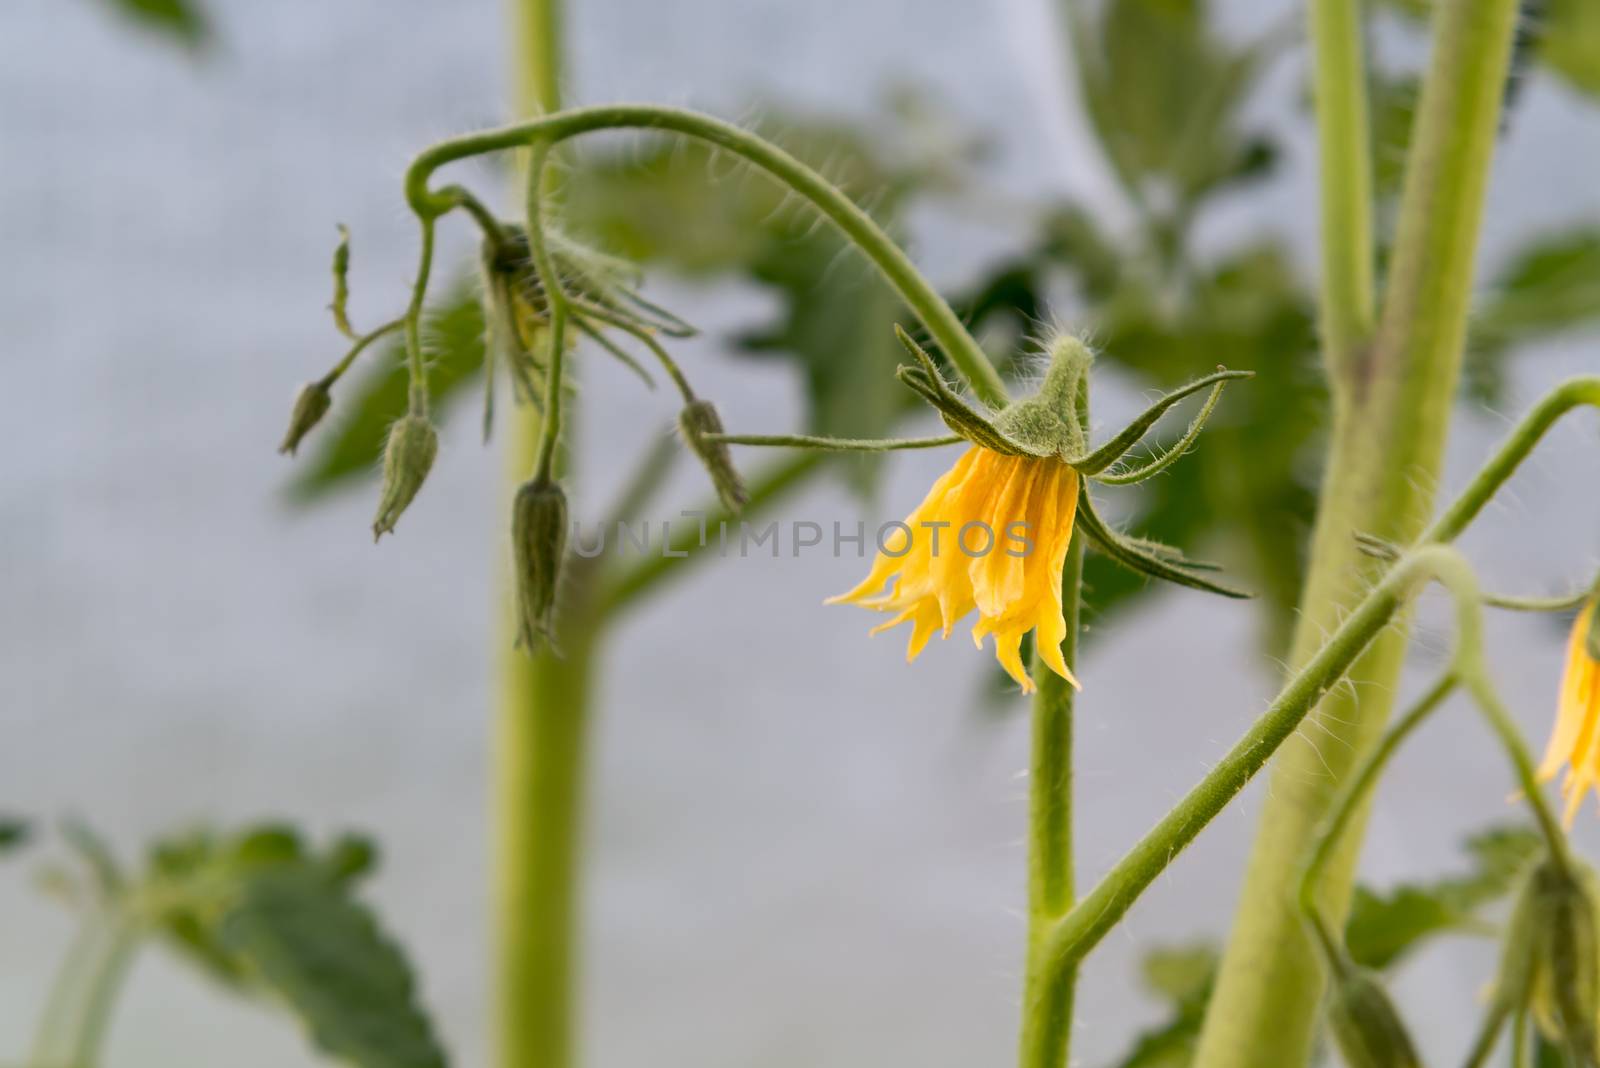 Flowers on tomato plants growing in a greenhouse close-up by galsand